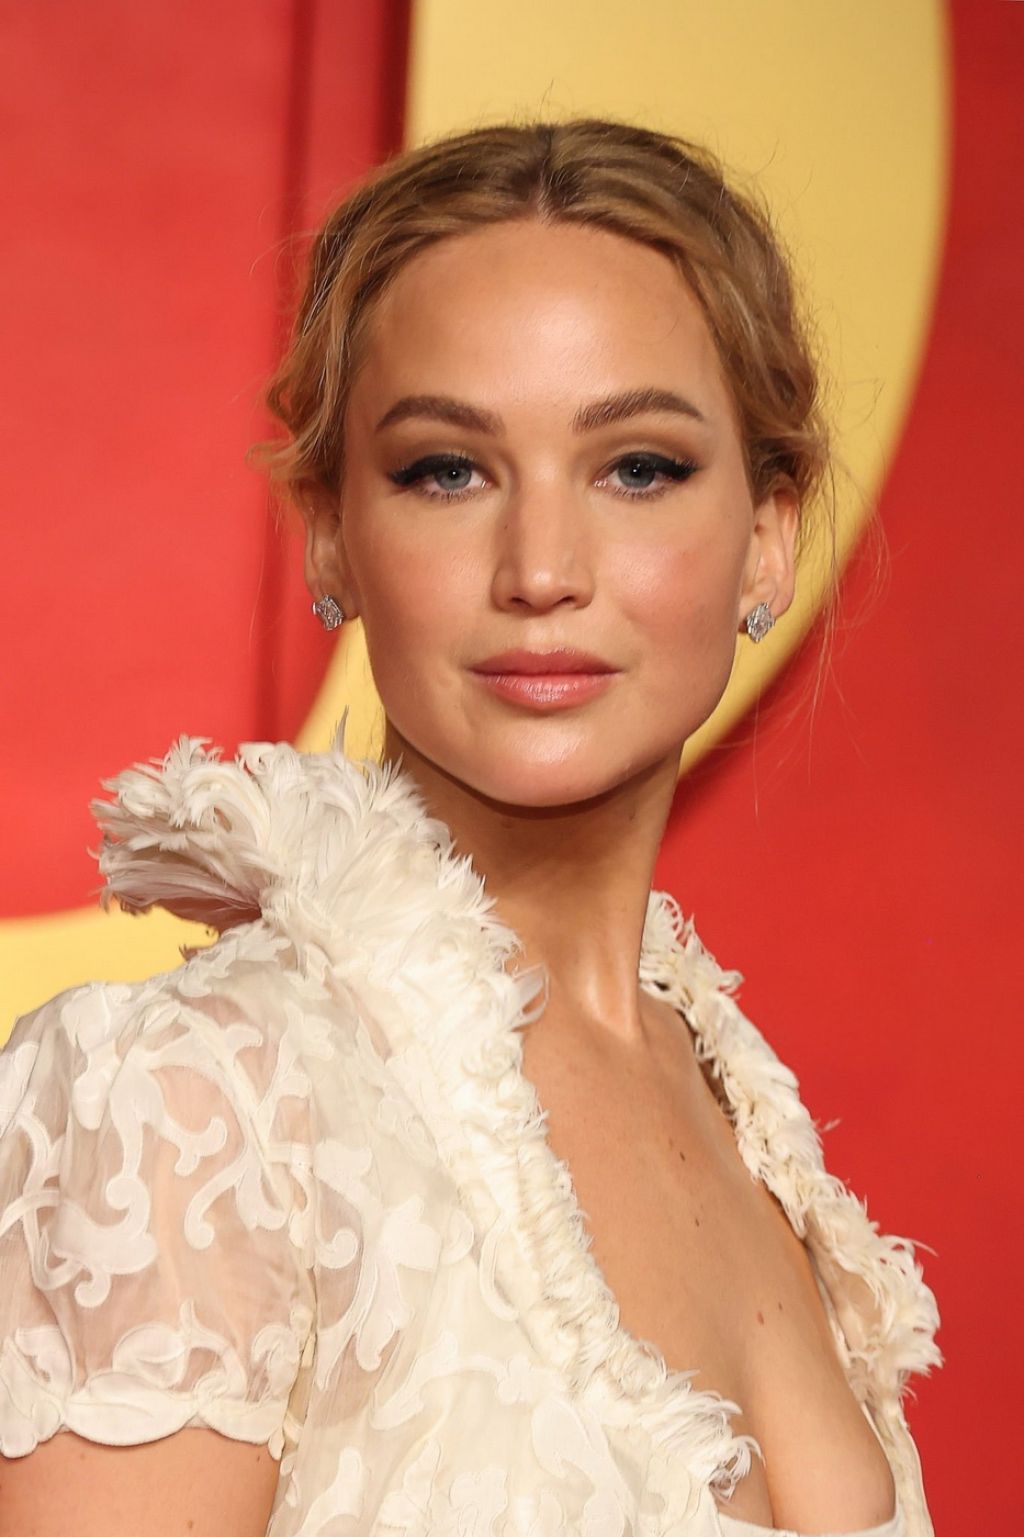 JENNIFER LAWRENCE AT VANITY FAIR OSCAR PARTY IN BEVERLY HILLS2